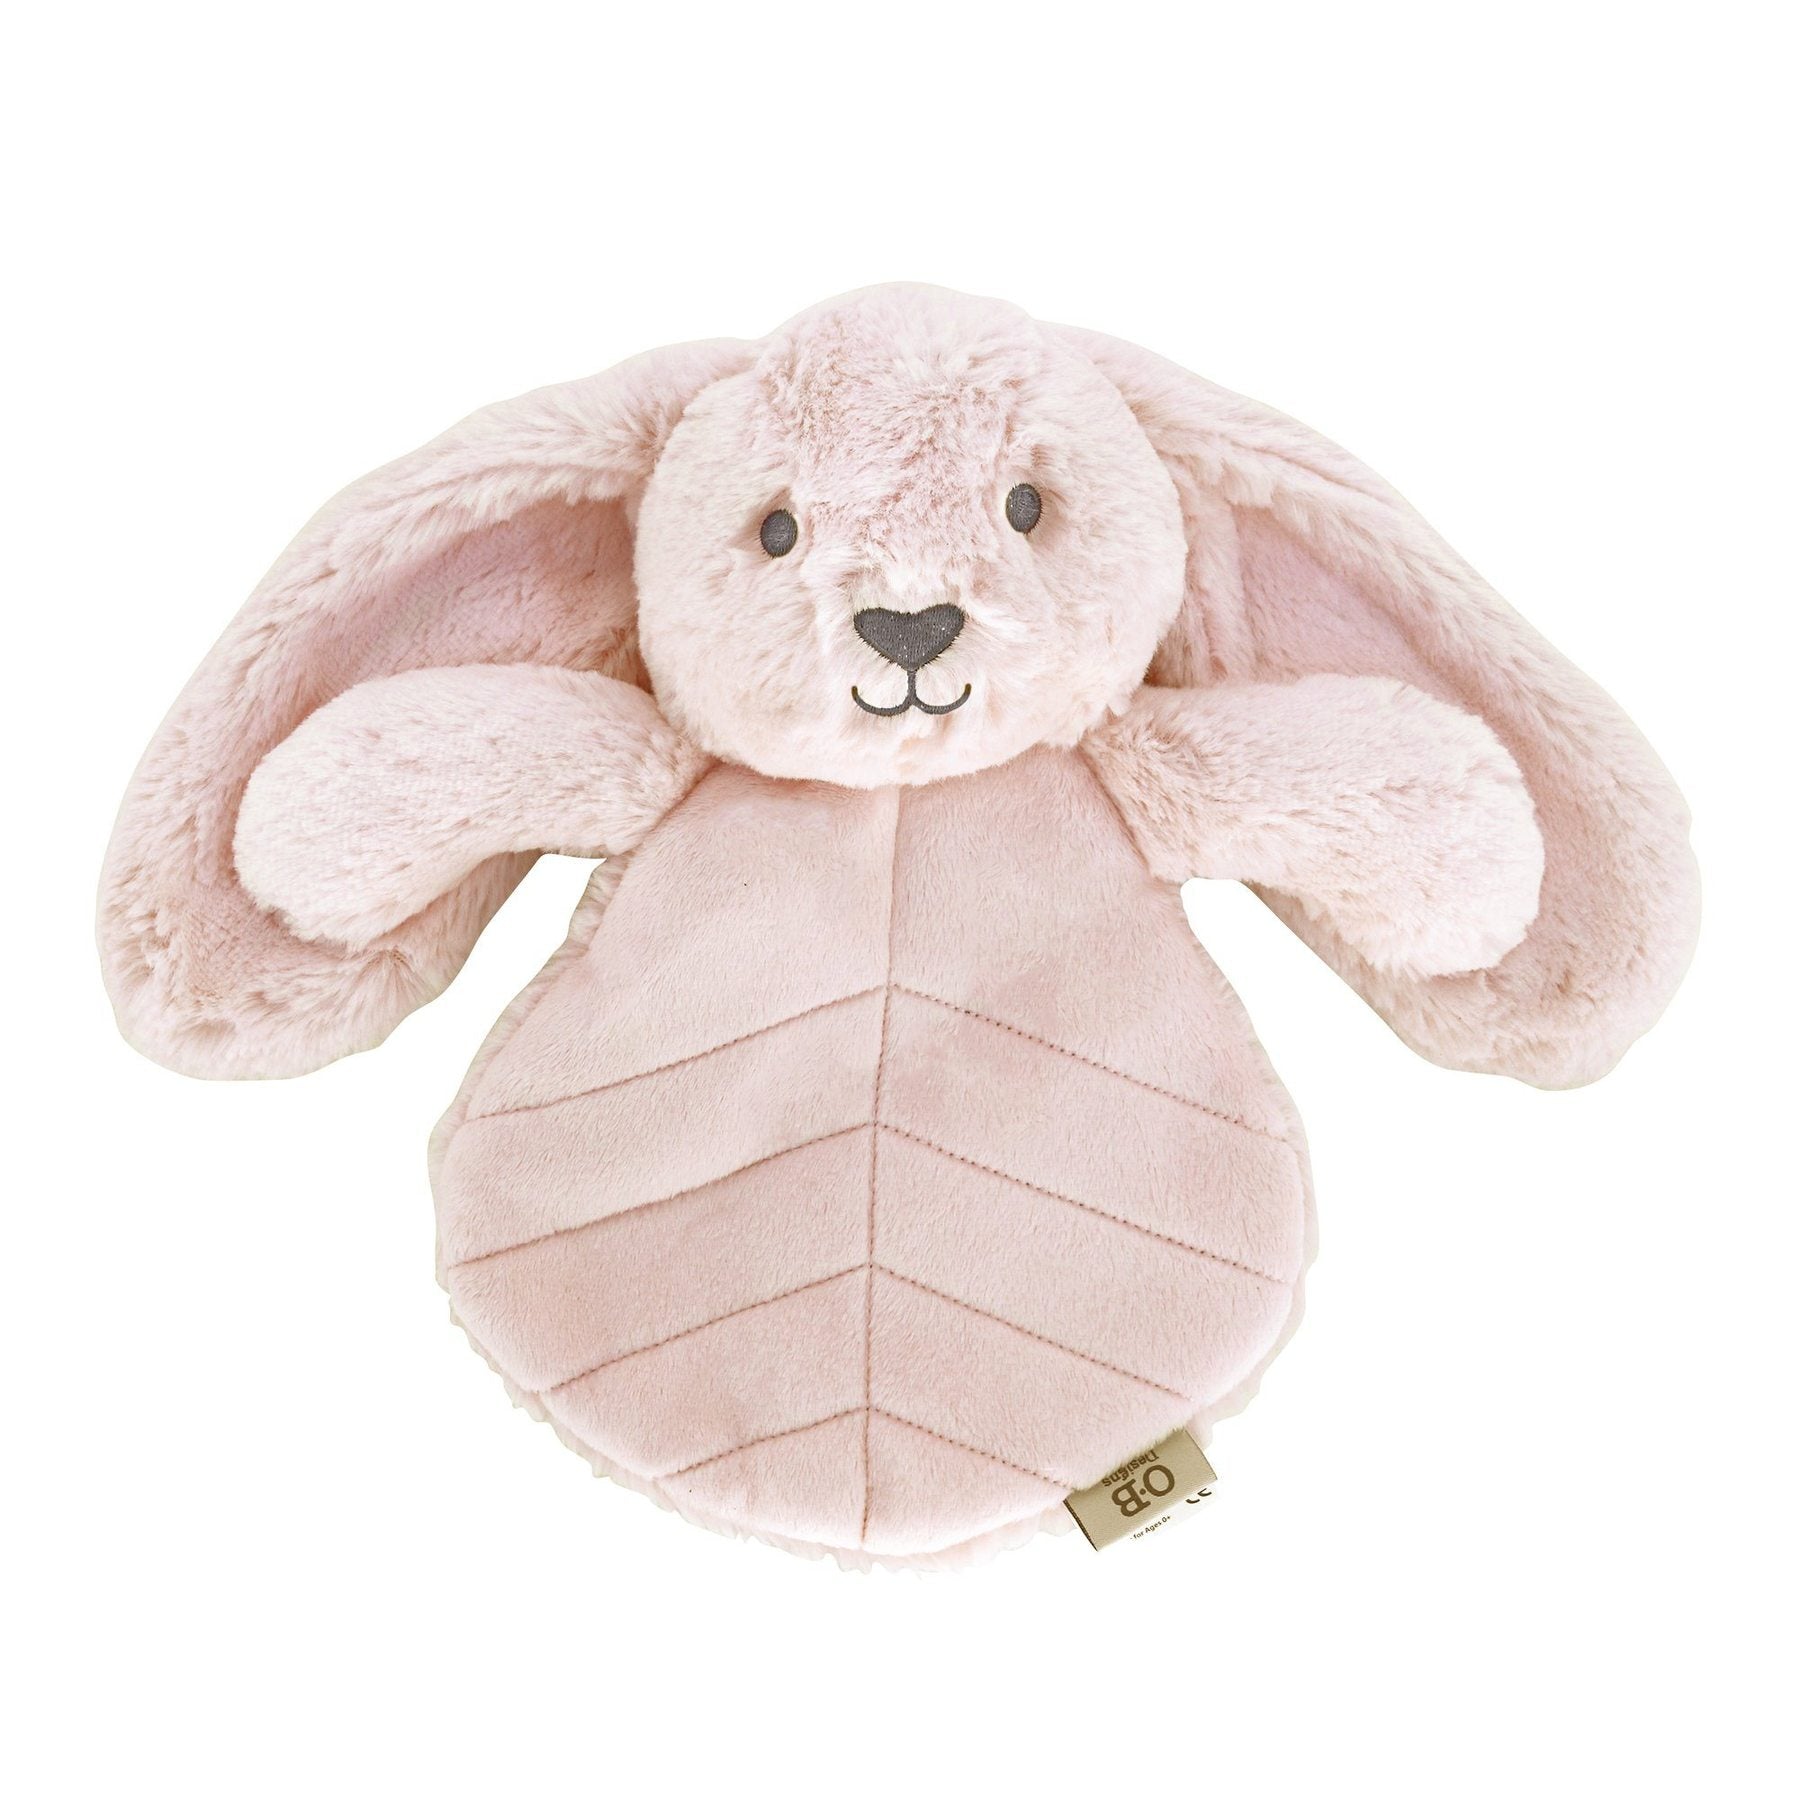 Betsy Bunny Baby Comforter - by OB Design